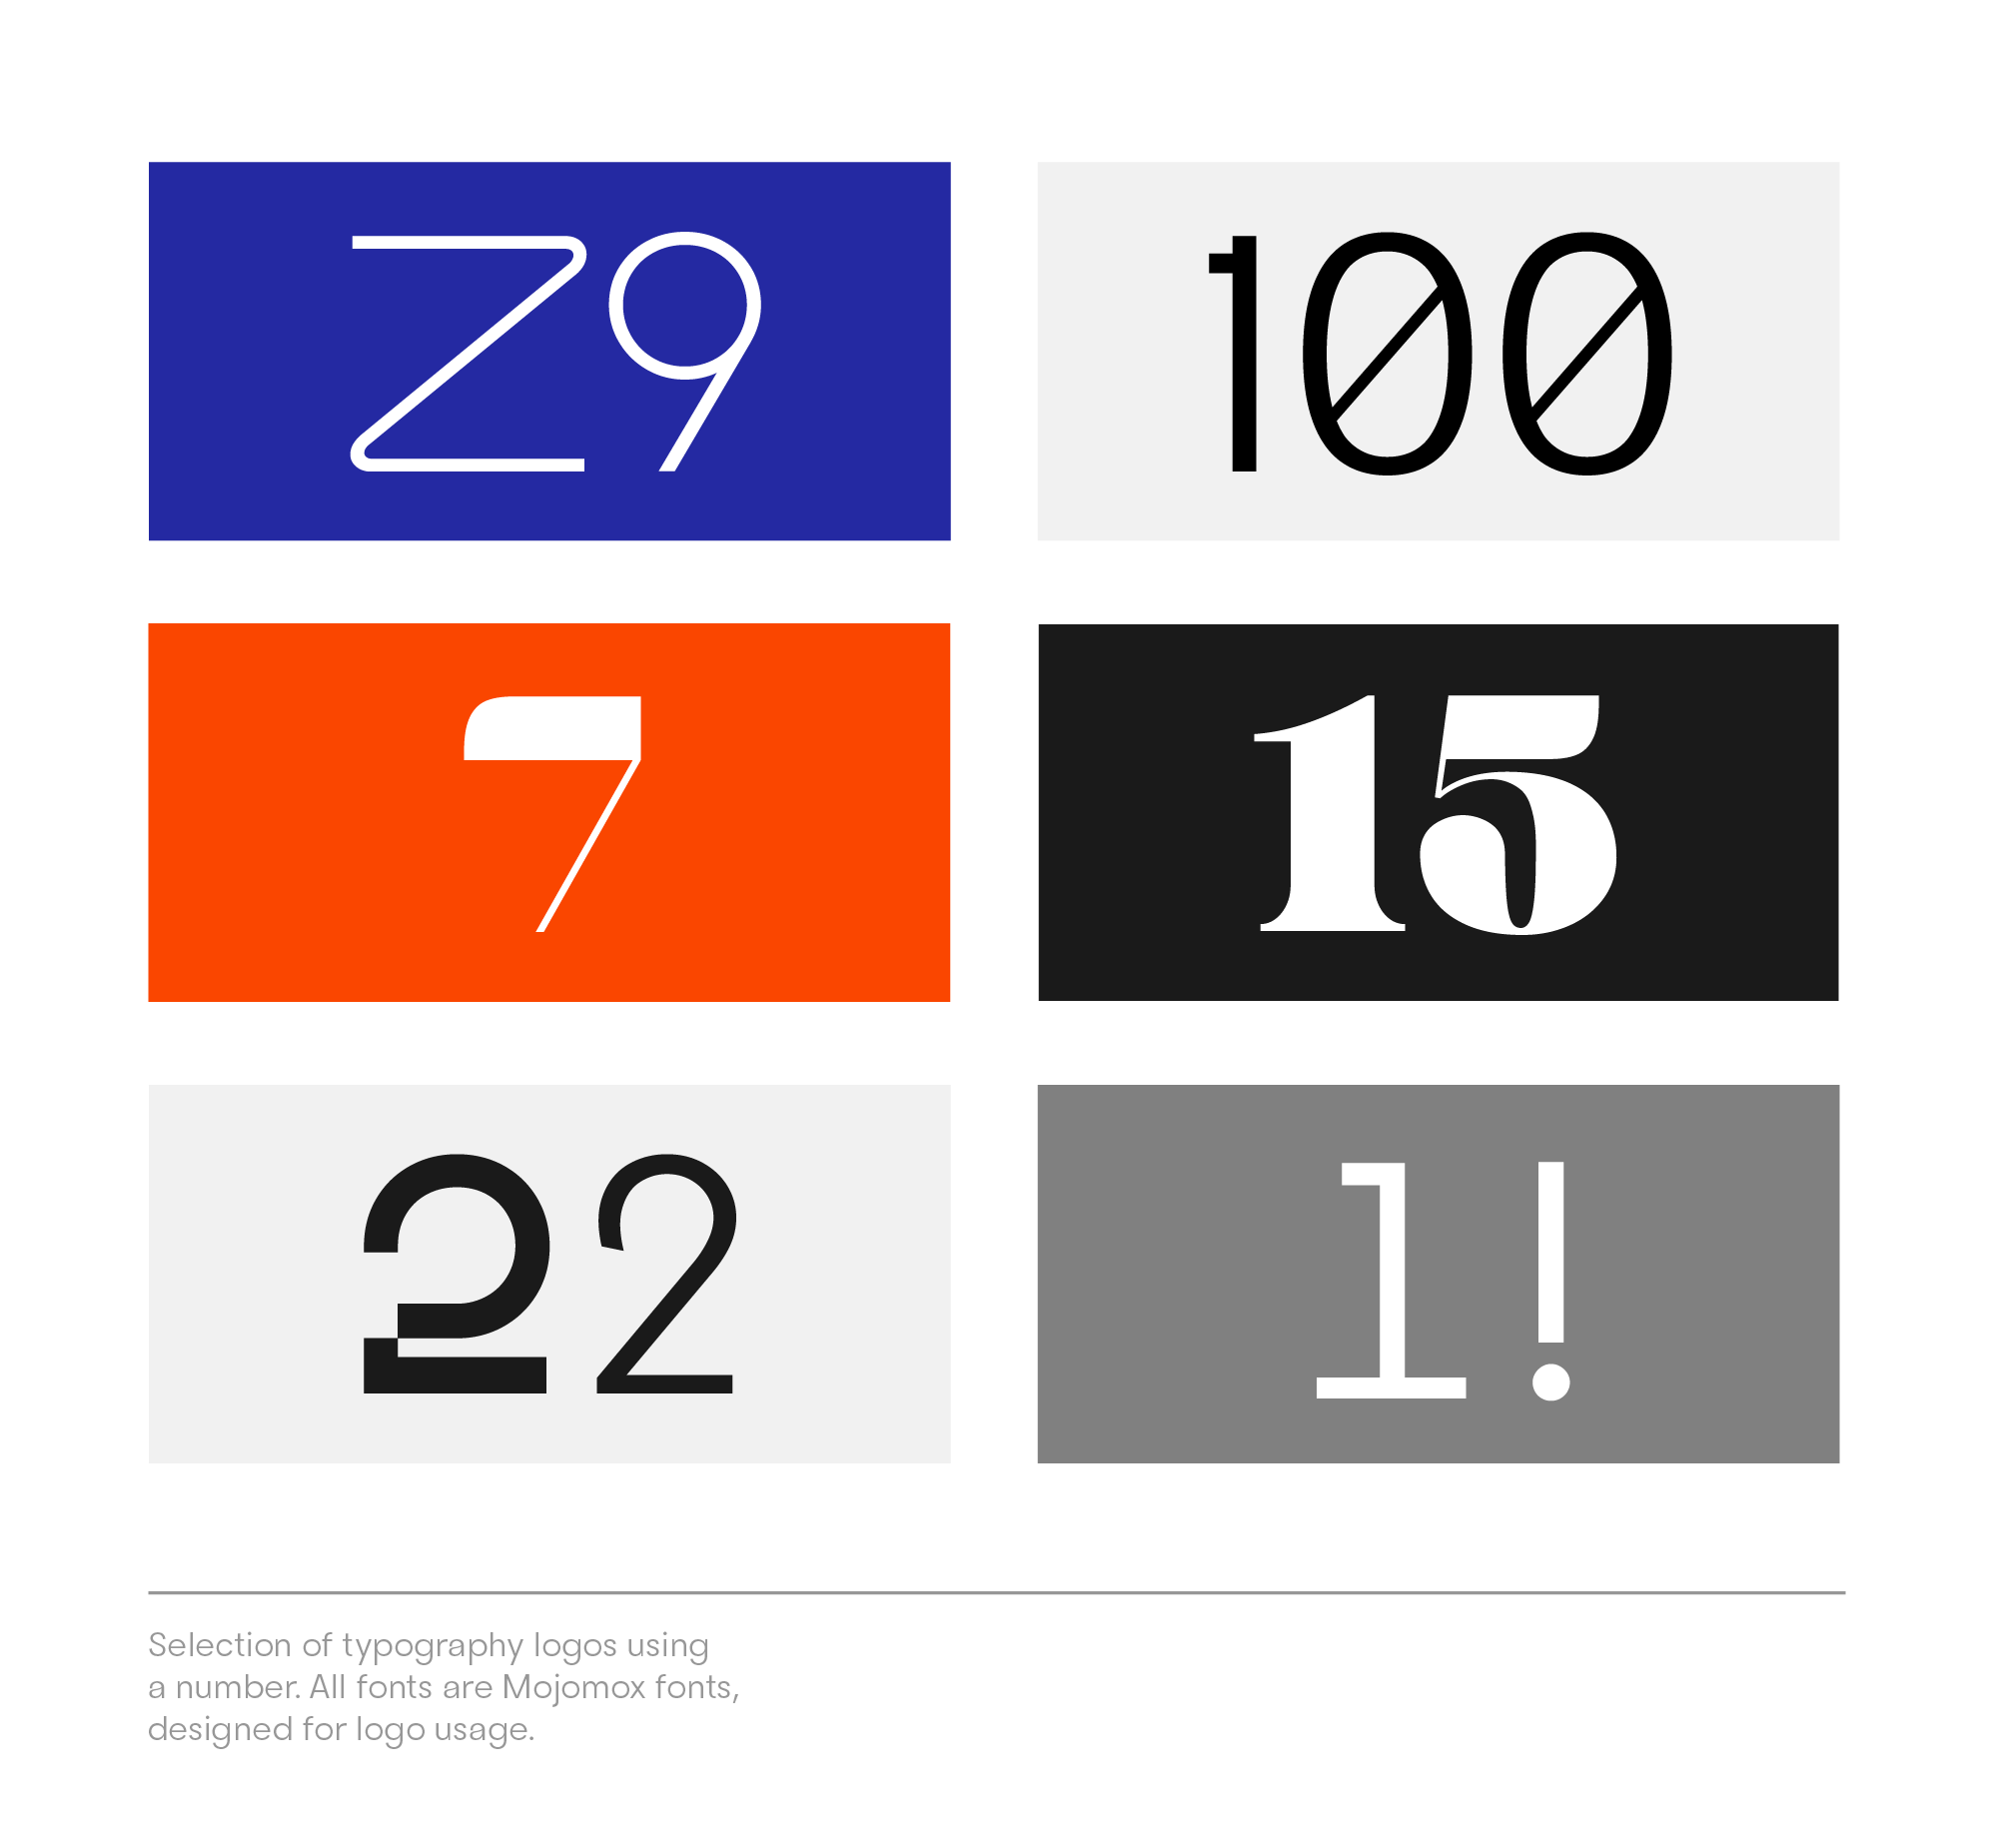 logos in type with numbers